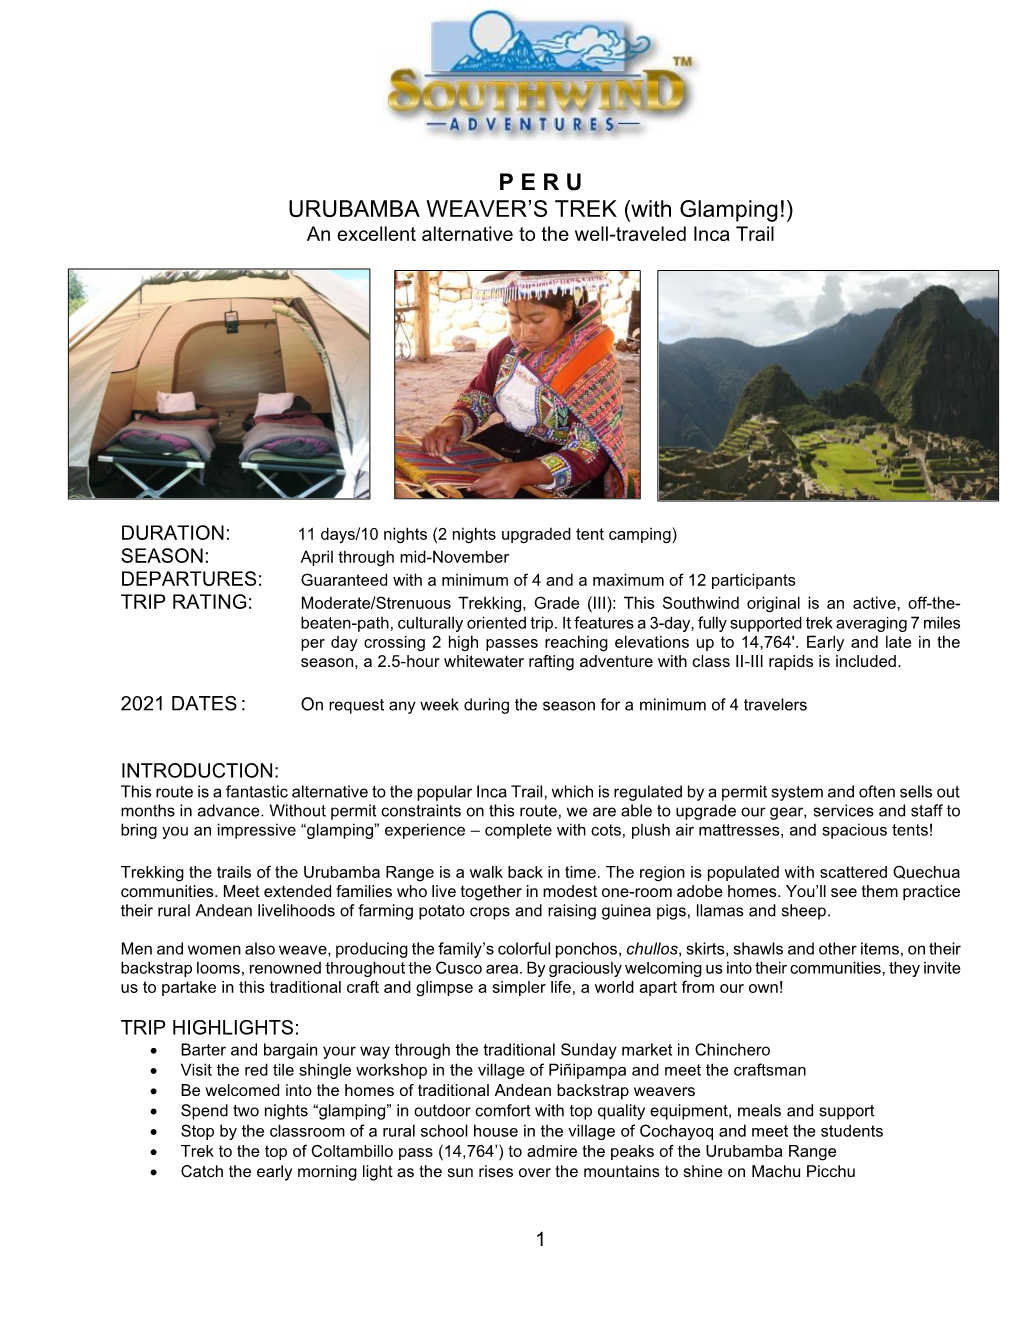 With Glamping!) an Excellent Alternative to the Well-Traveled Inca Trail